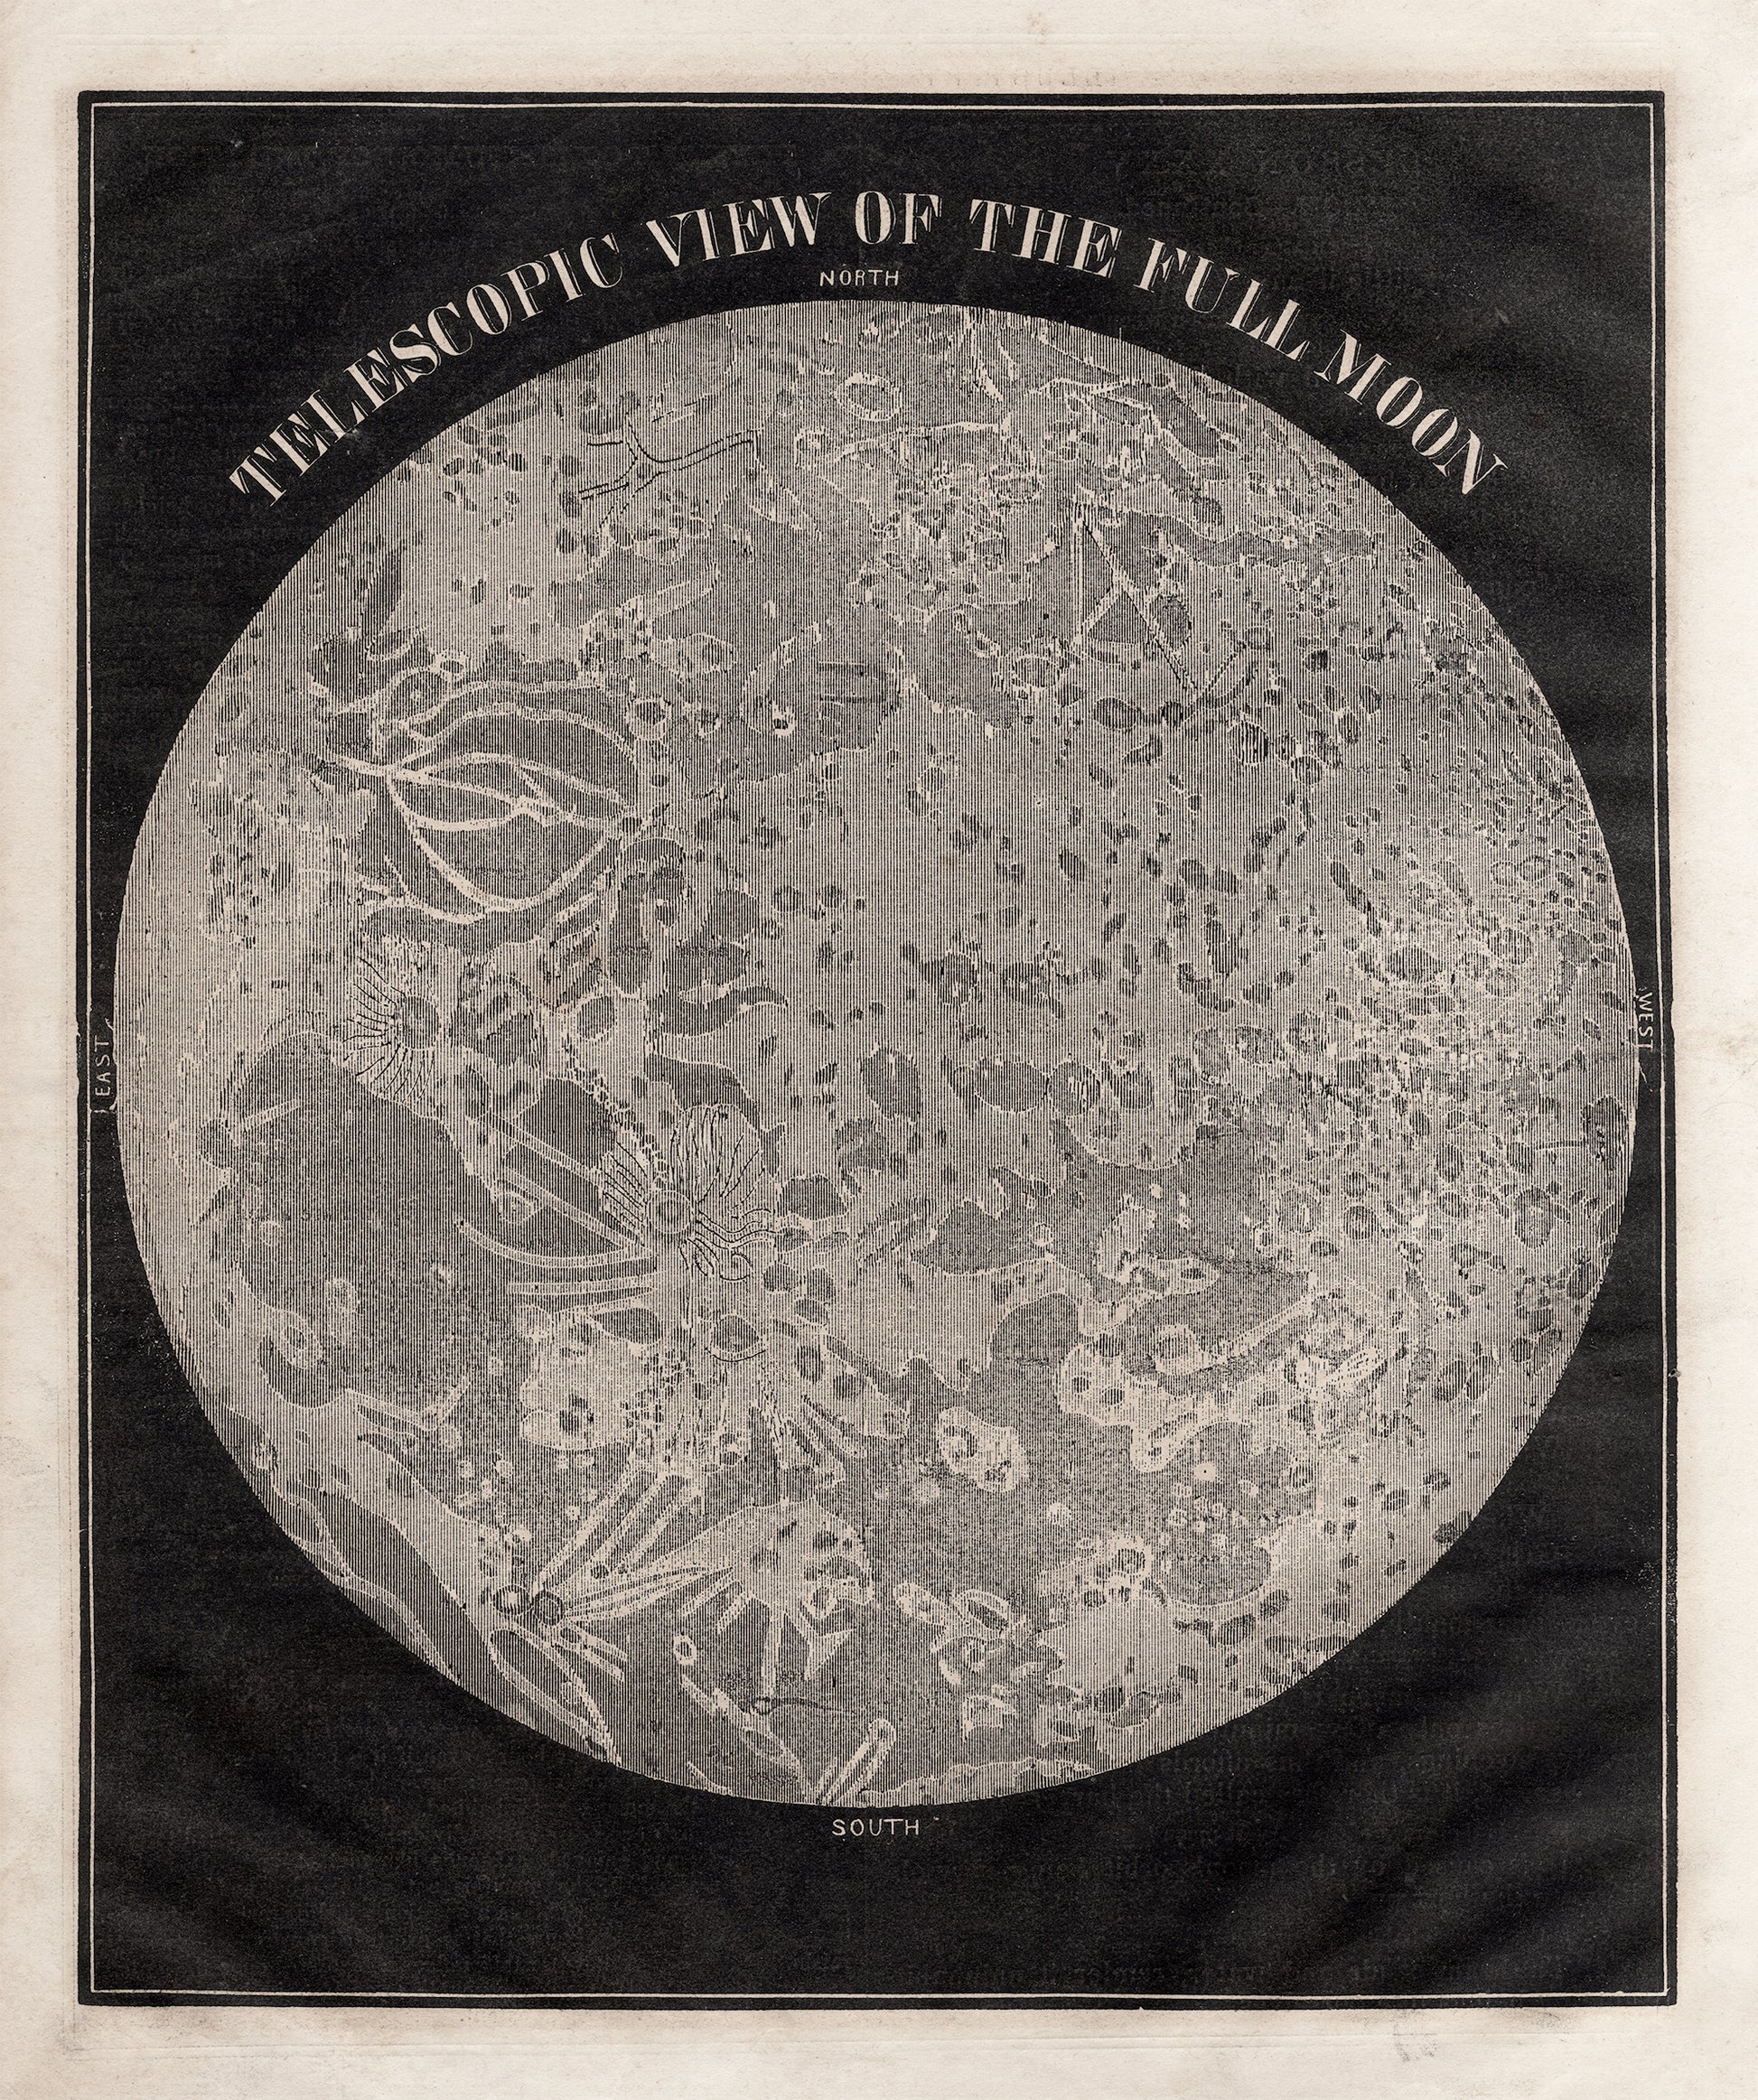 Telescopic View of the Full Moon - Print - Stomping Grounds